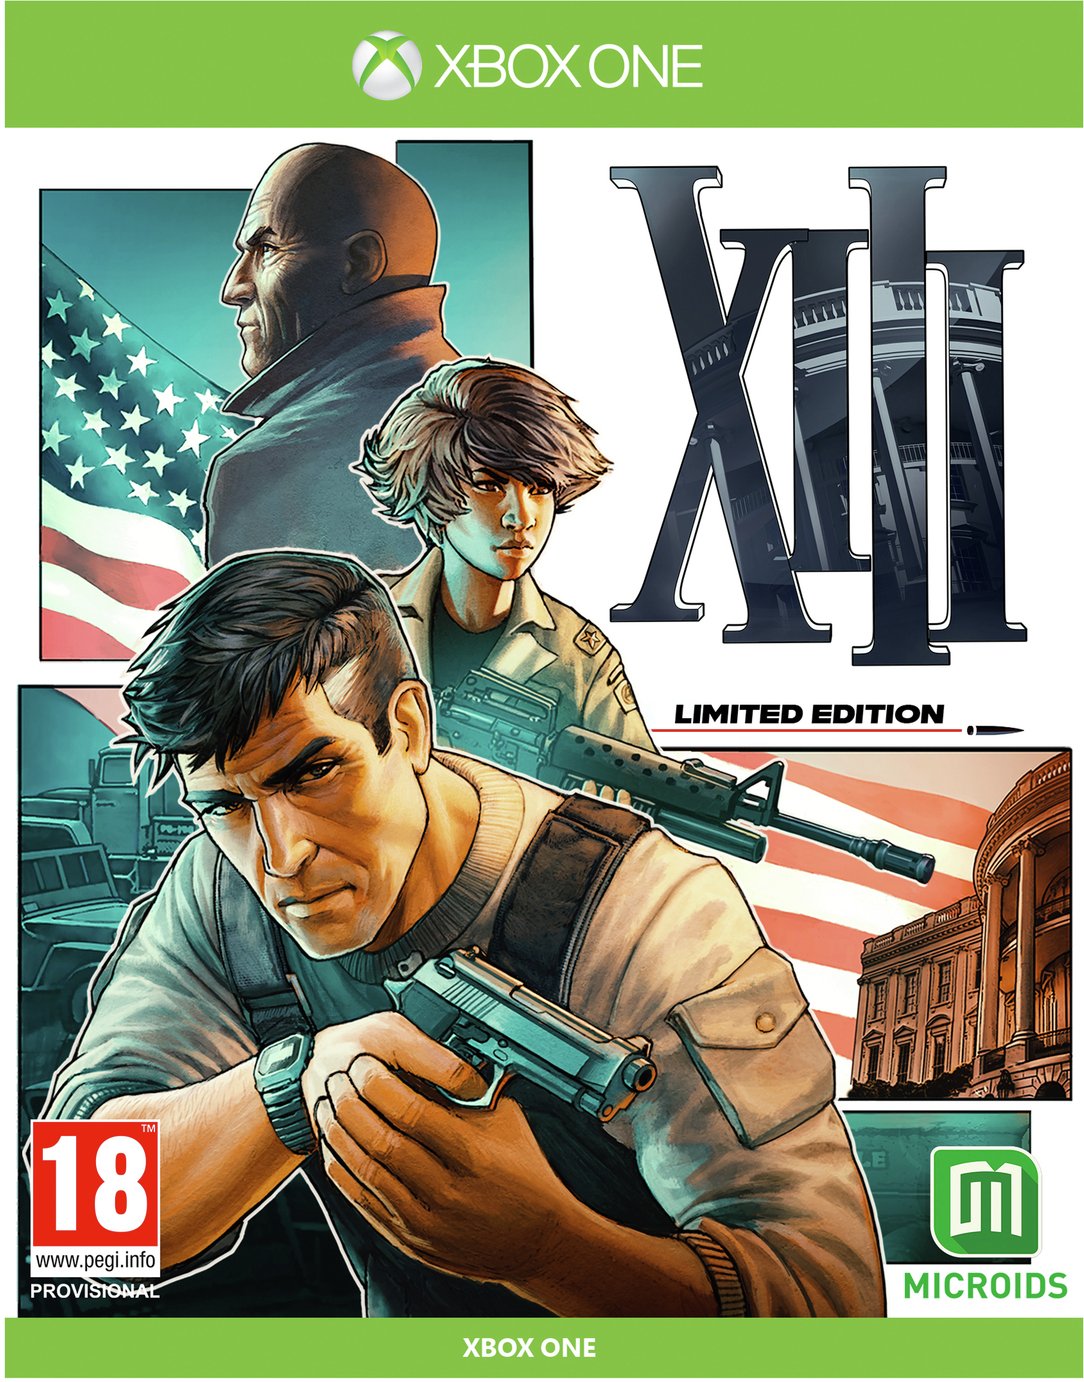 XIII Limited Edition Xbox One Game Pre-Order Review